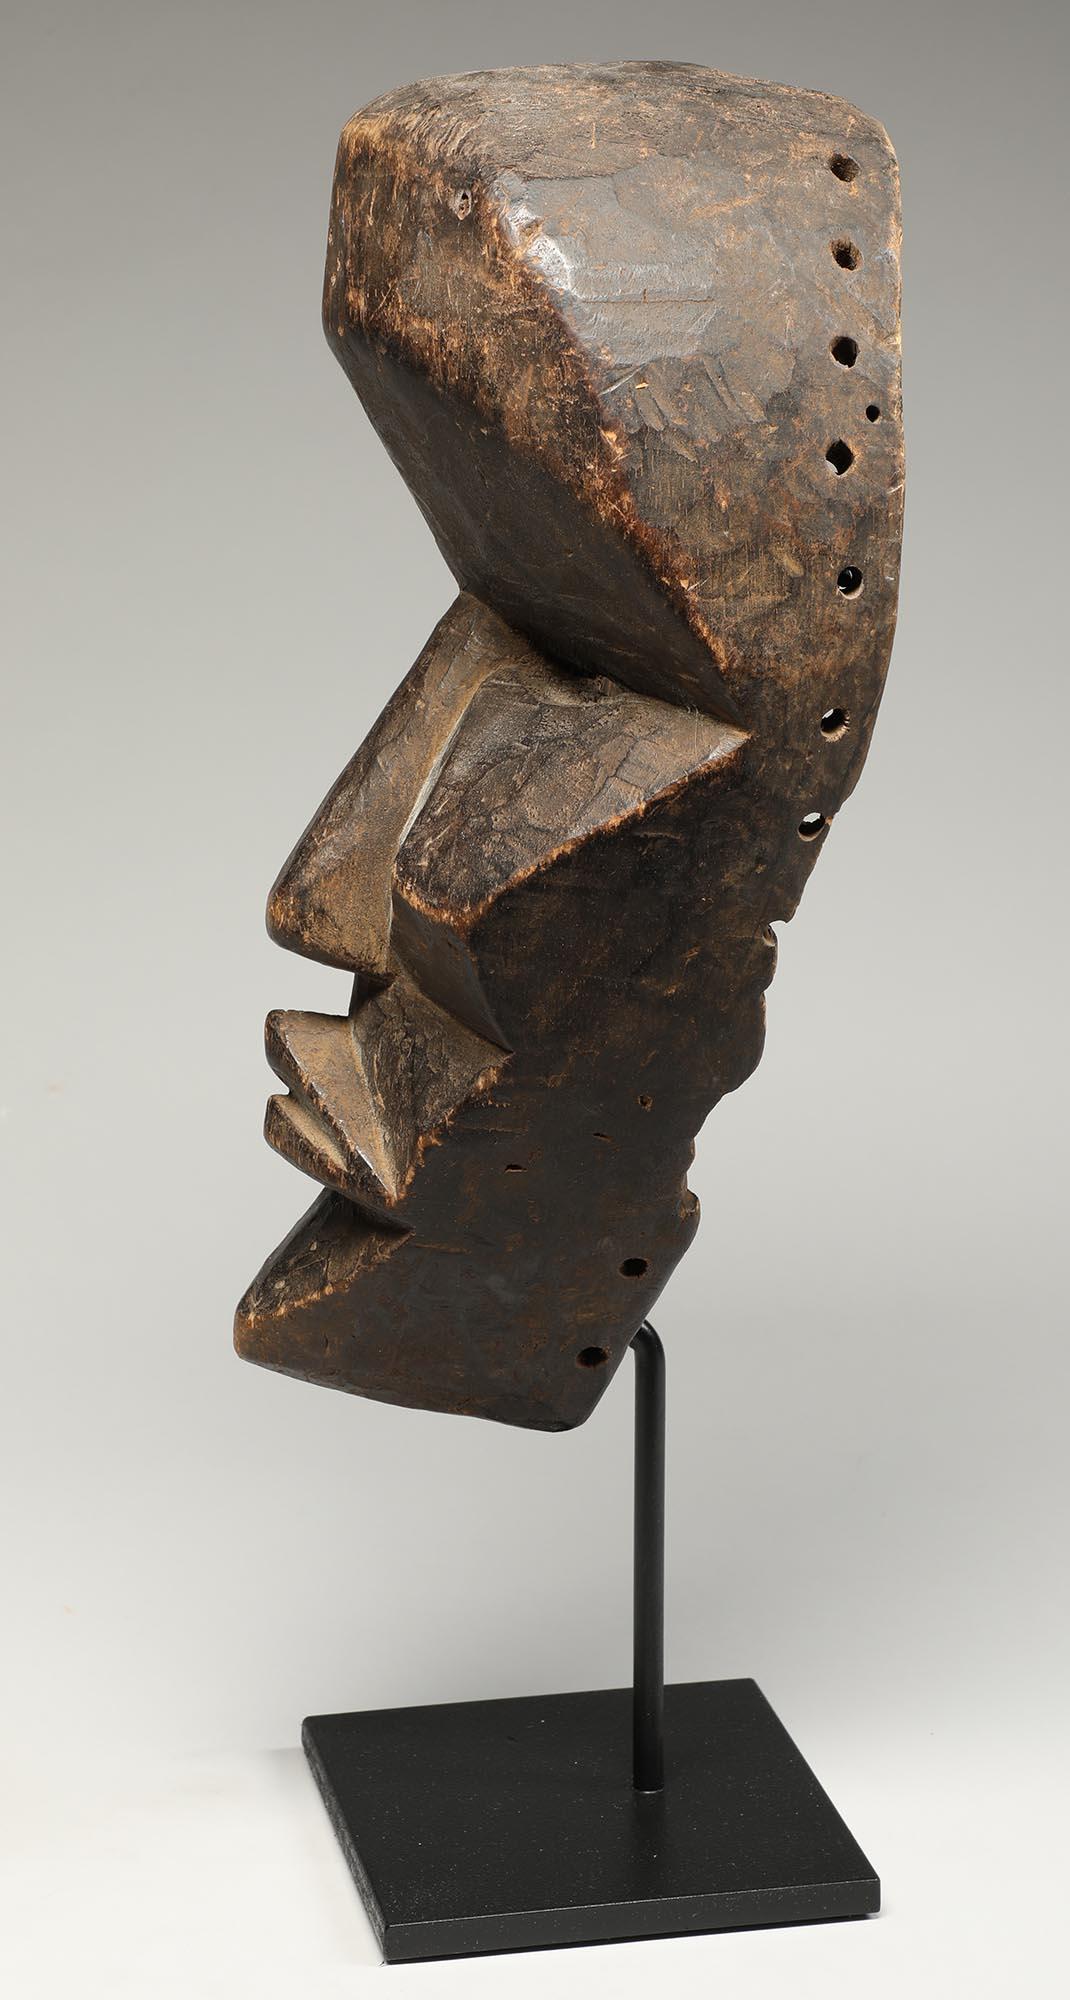 Liberian Very Large Strong Expressive Cubist Dan Mask Early 20th Century Liberia, Africa